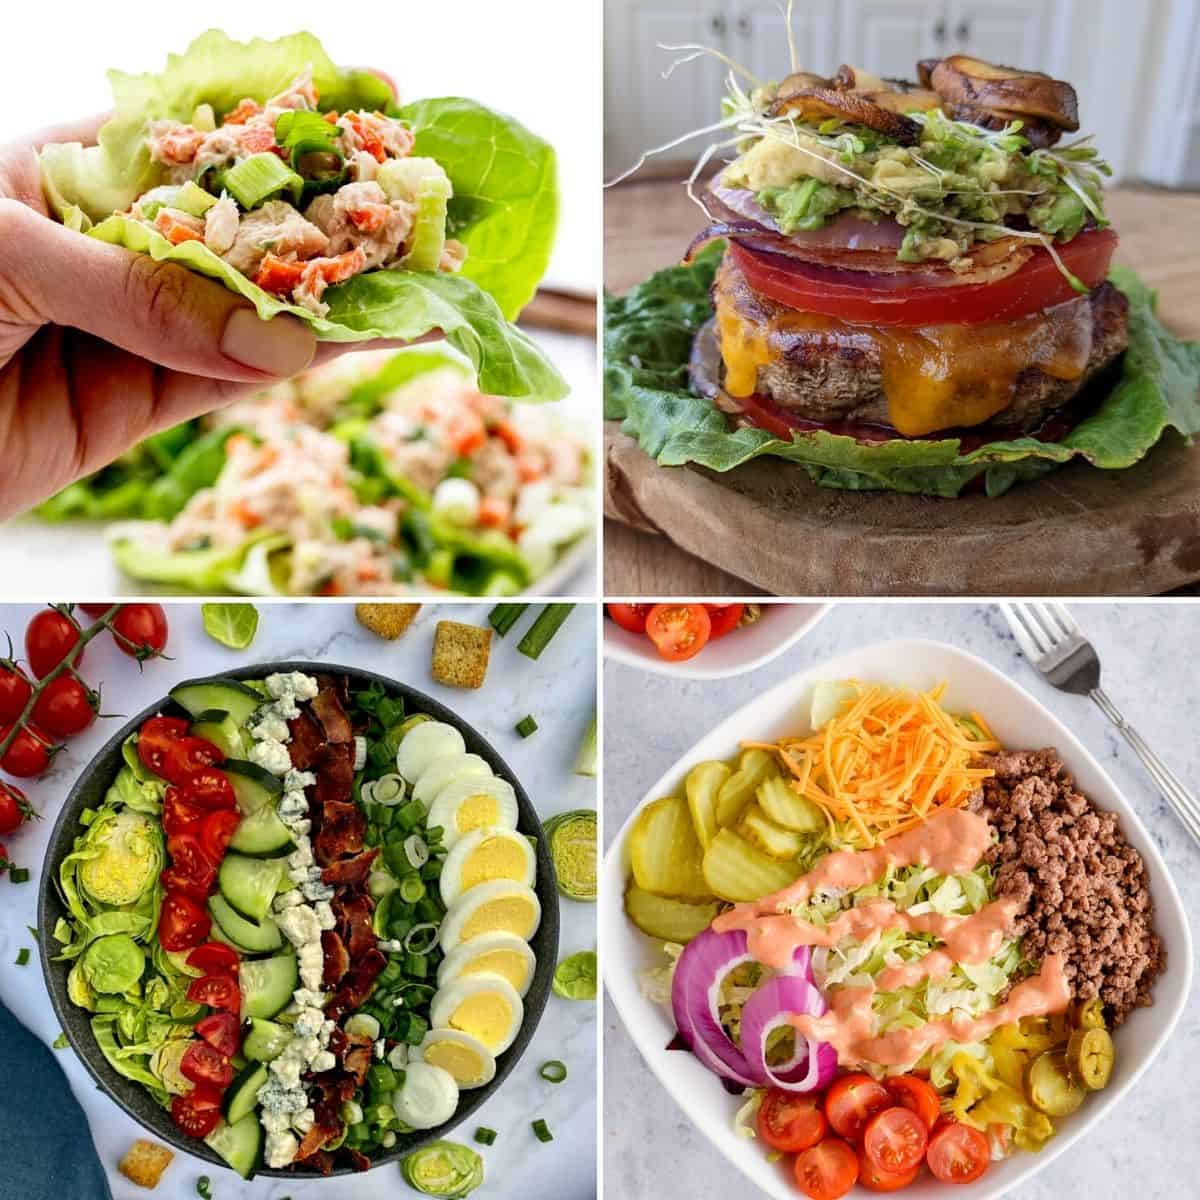 31 Slow Carb Lunch Ideas Recipes (4 Hour Body Diet), 55% OFF